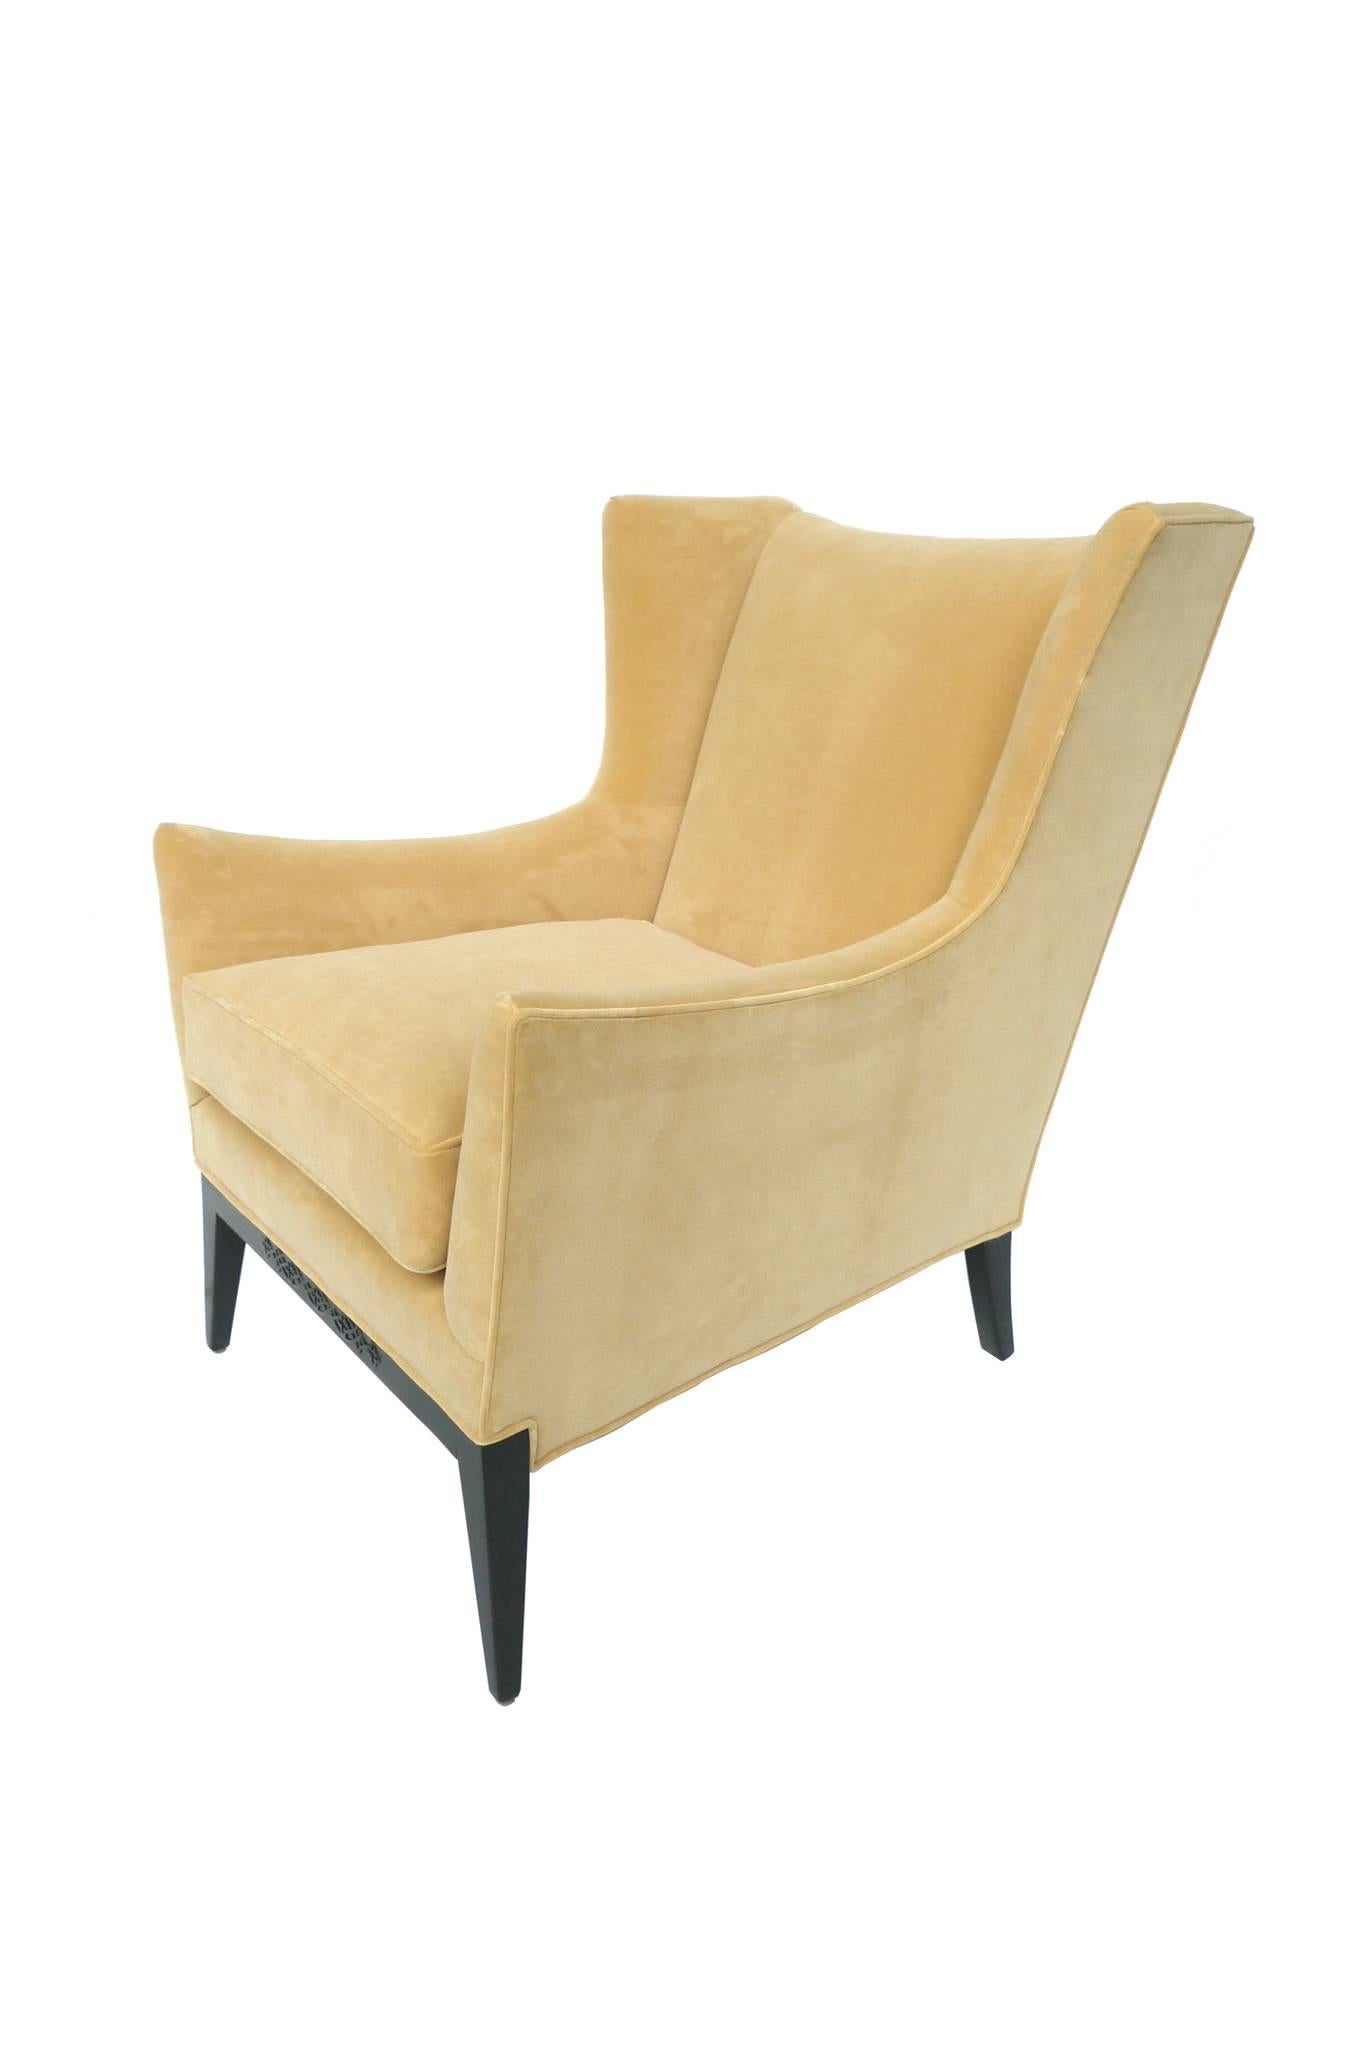 Mid-Century Modern Midcentury Wingback Armchair Attributed to James Mont